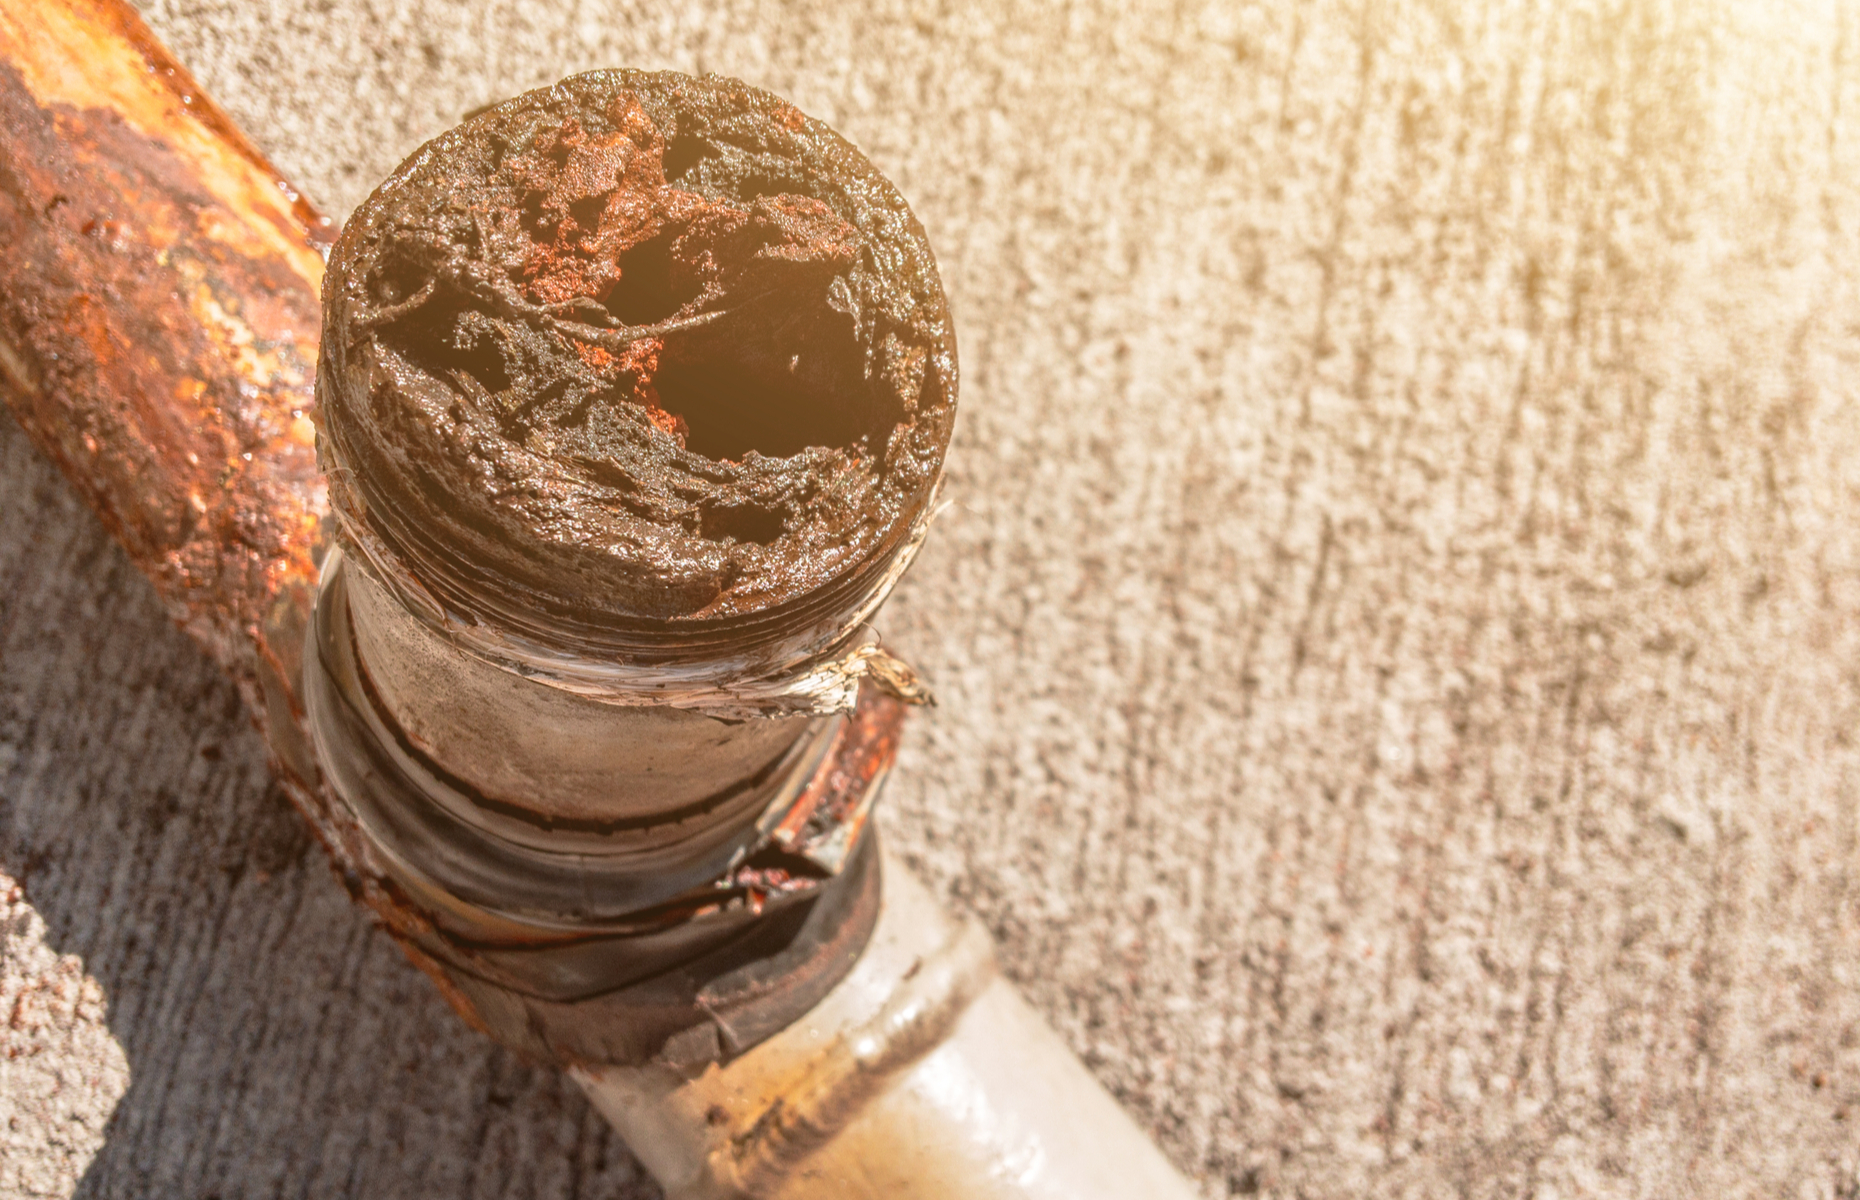 Now's the time to ensure your pipes are free of debris. Image: JJSINA / Shutterstock